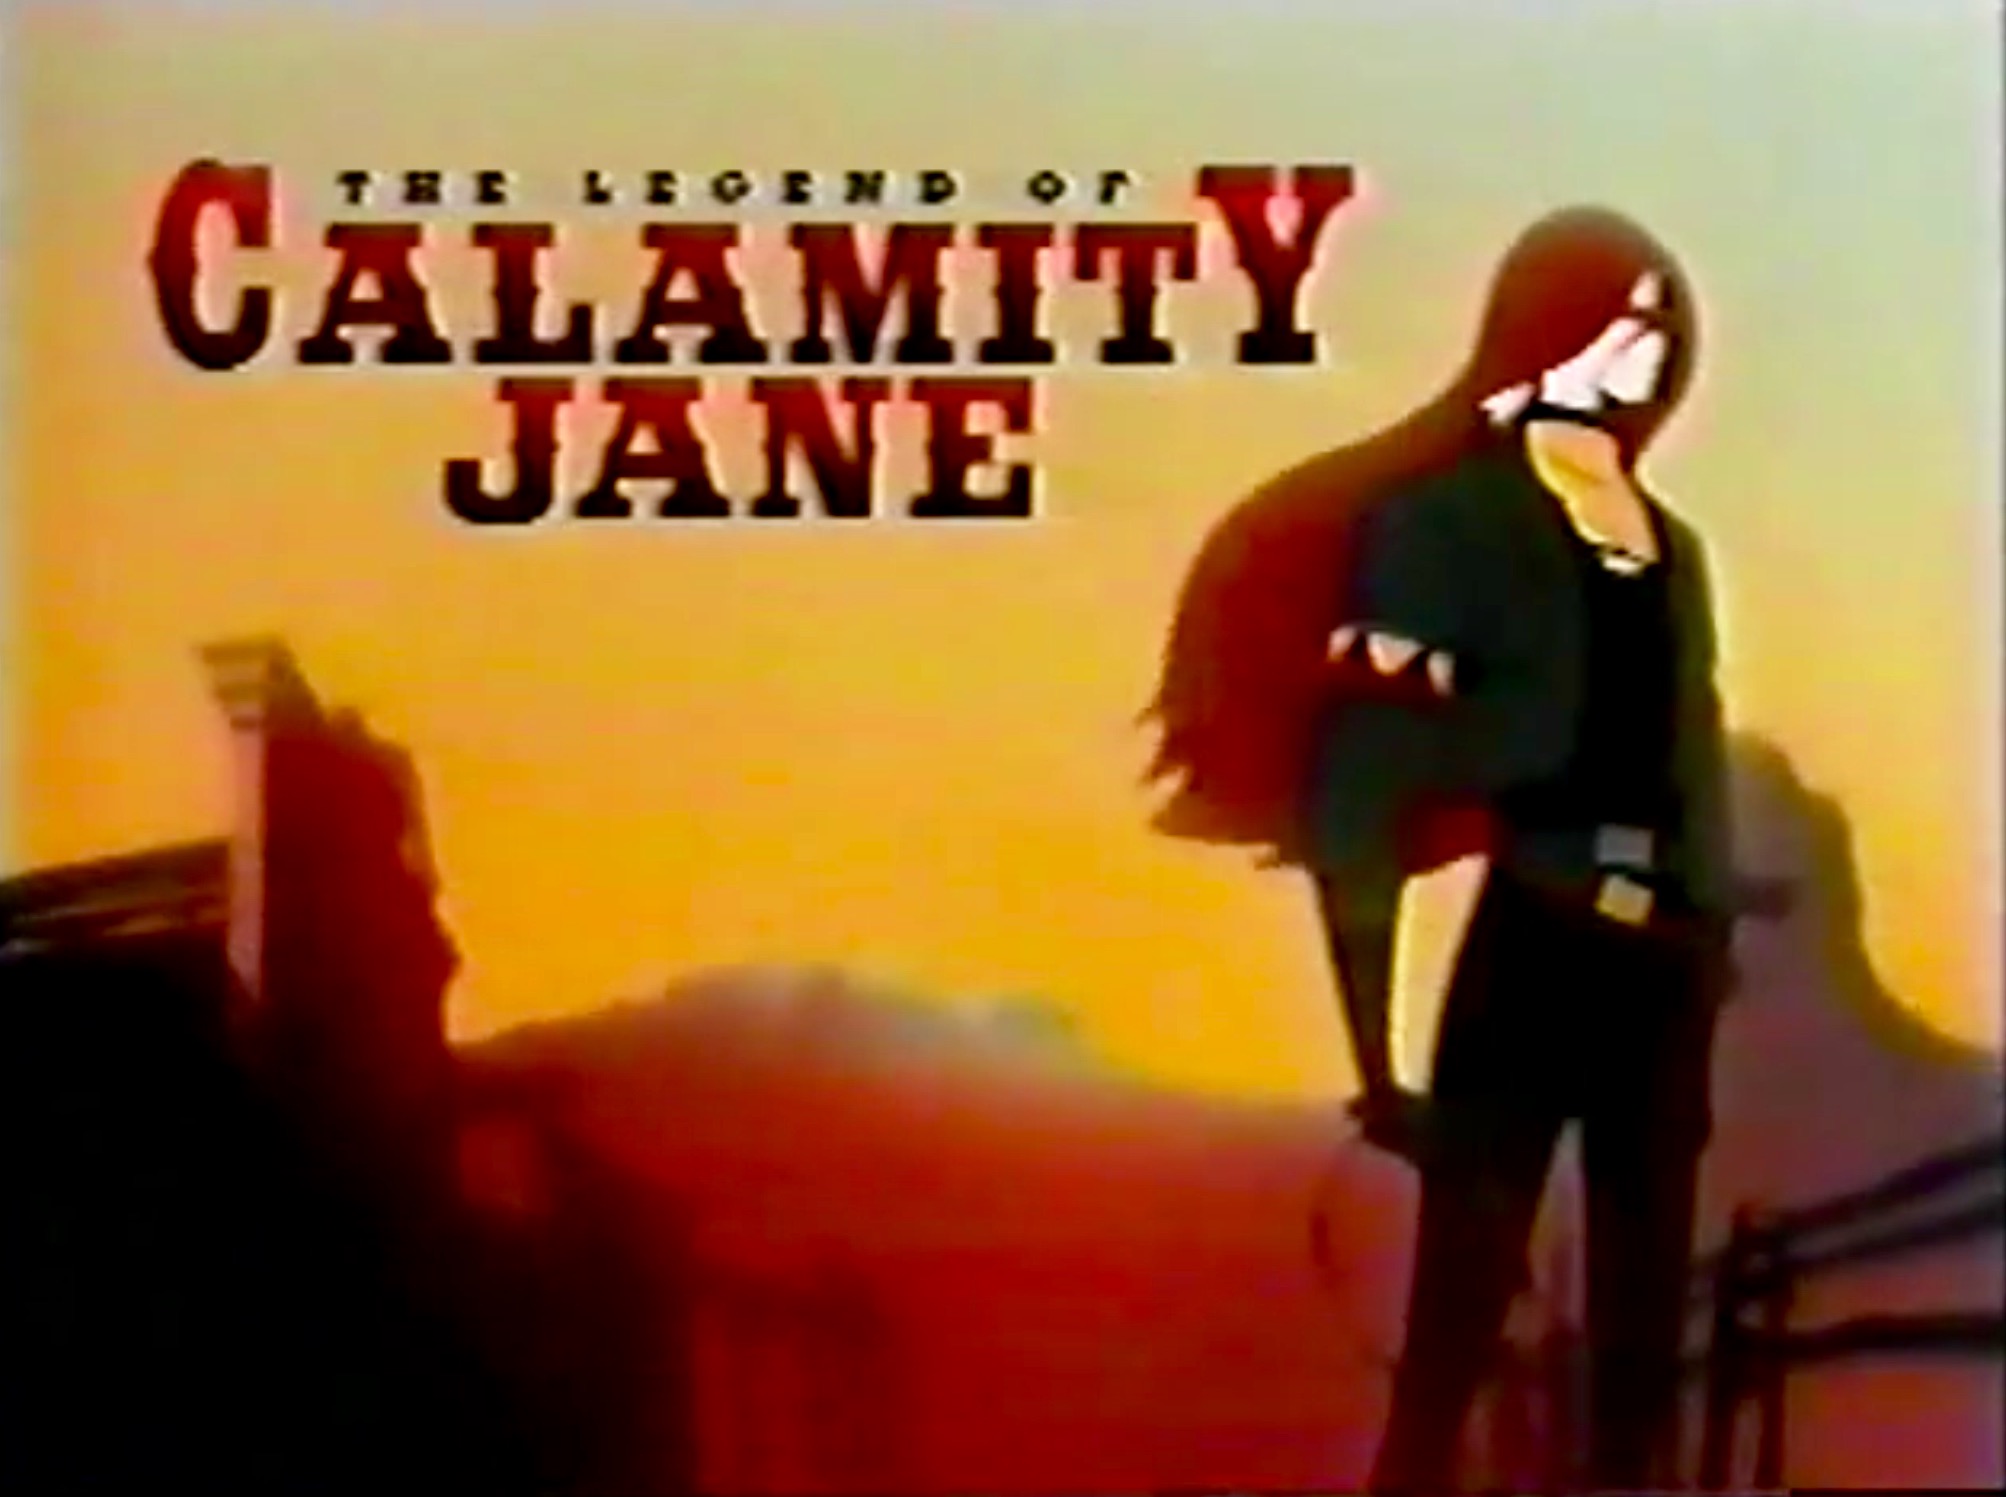 "Dead or Alive" and "Protege" - The Legend of Calamity Jane (found English dub of animated series; 1997-1998)